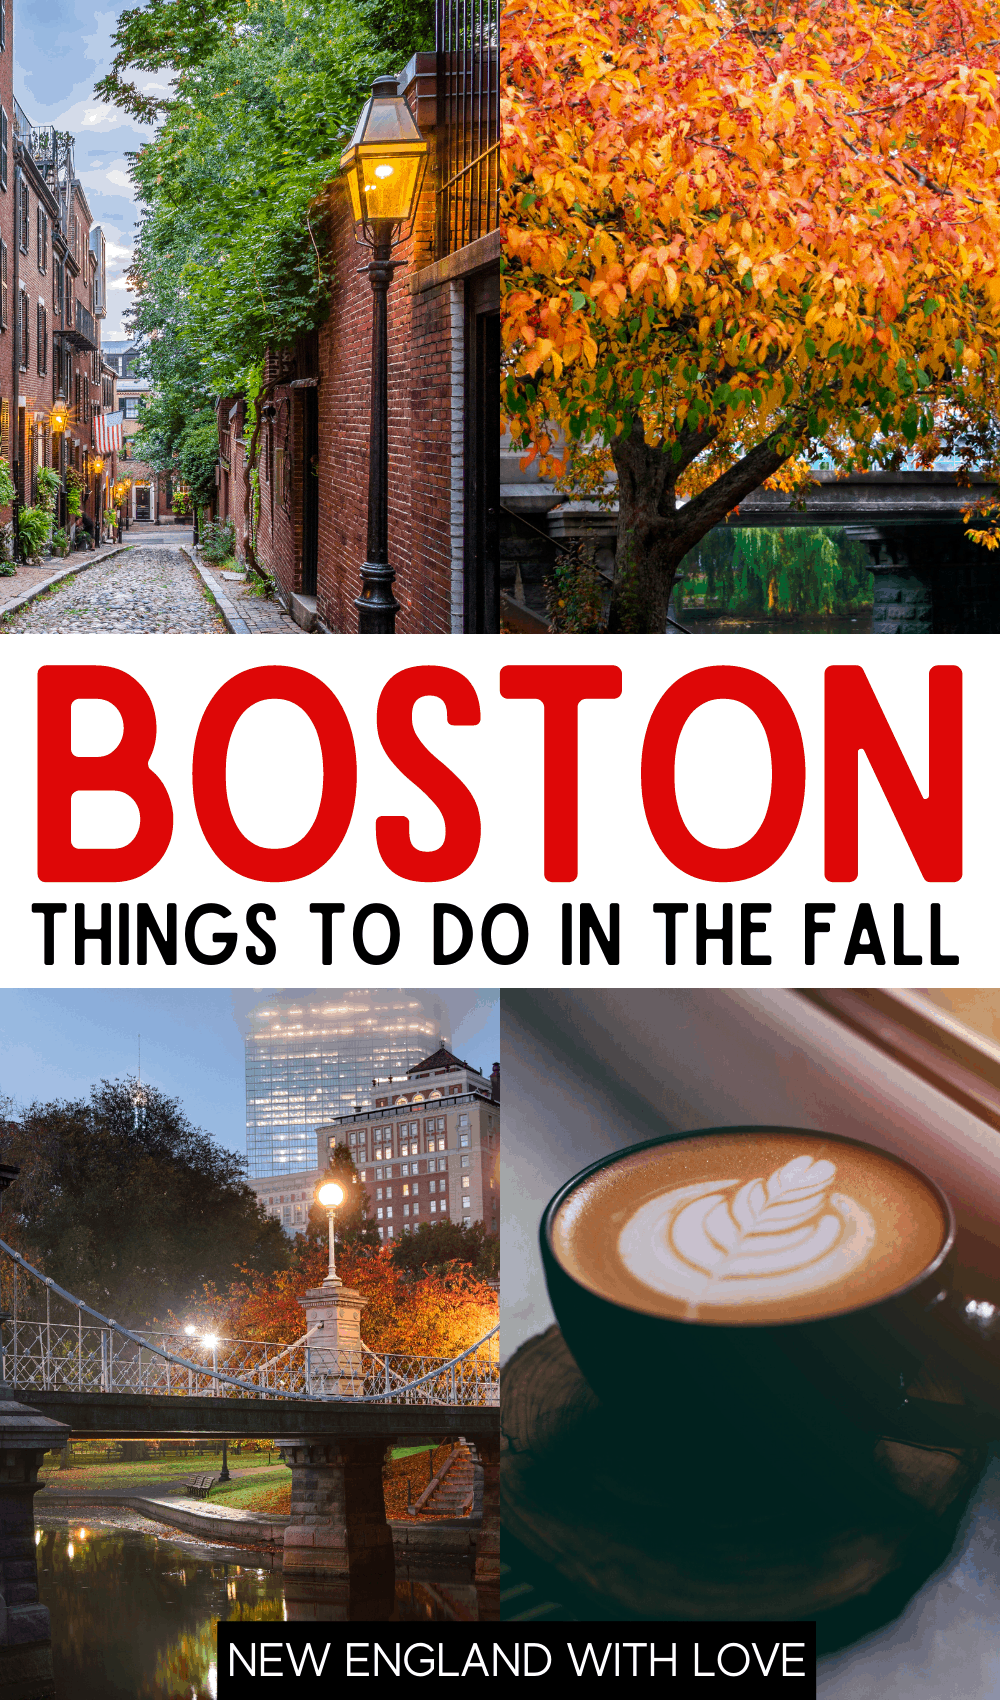 Pinterest graphic reading "BOSTON THINGS TO DO IN THE FALL" with a cup of cappucino  on the bottom right